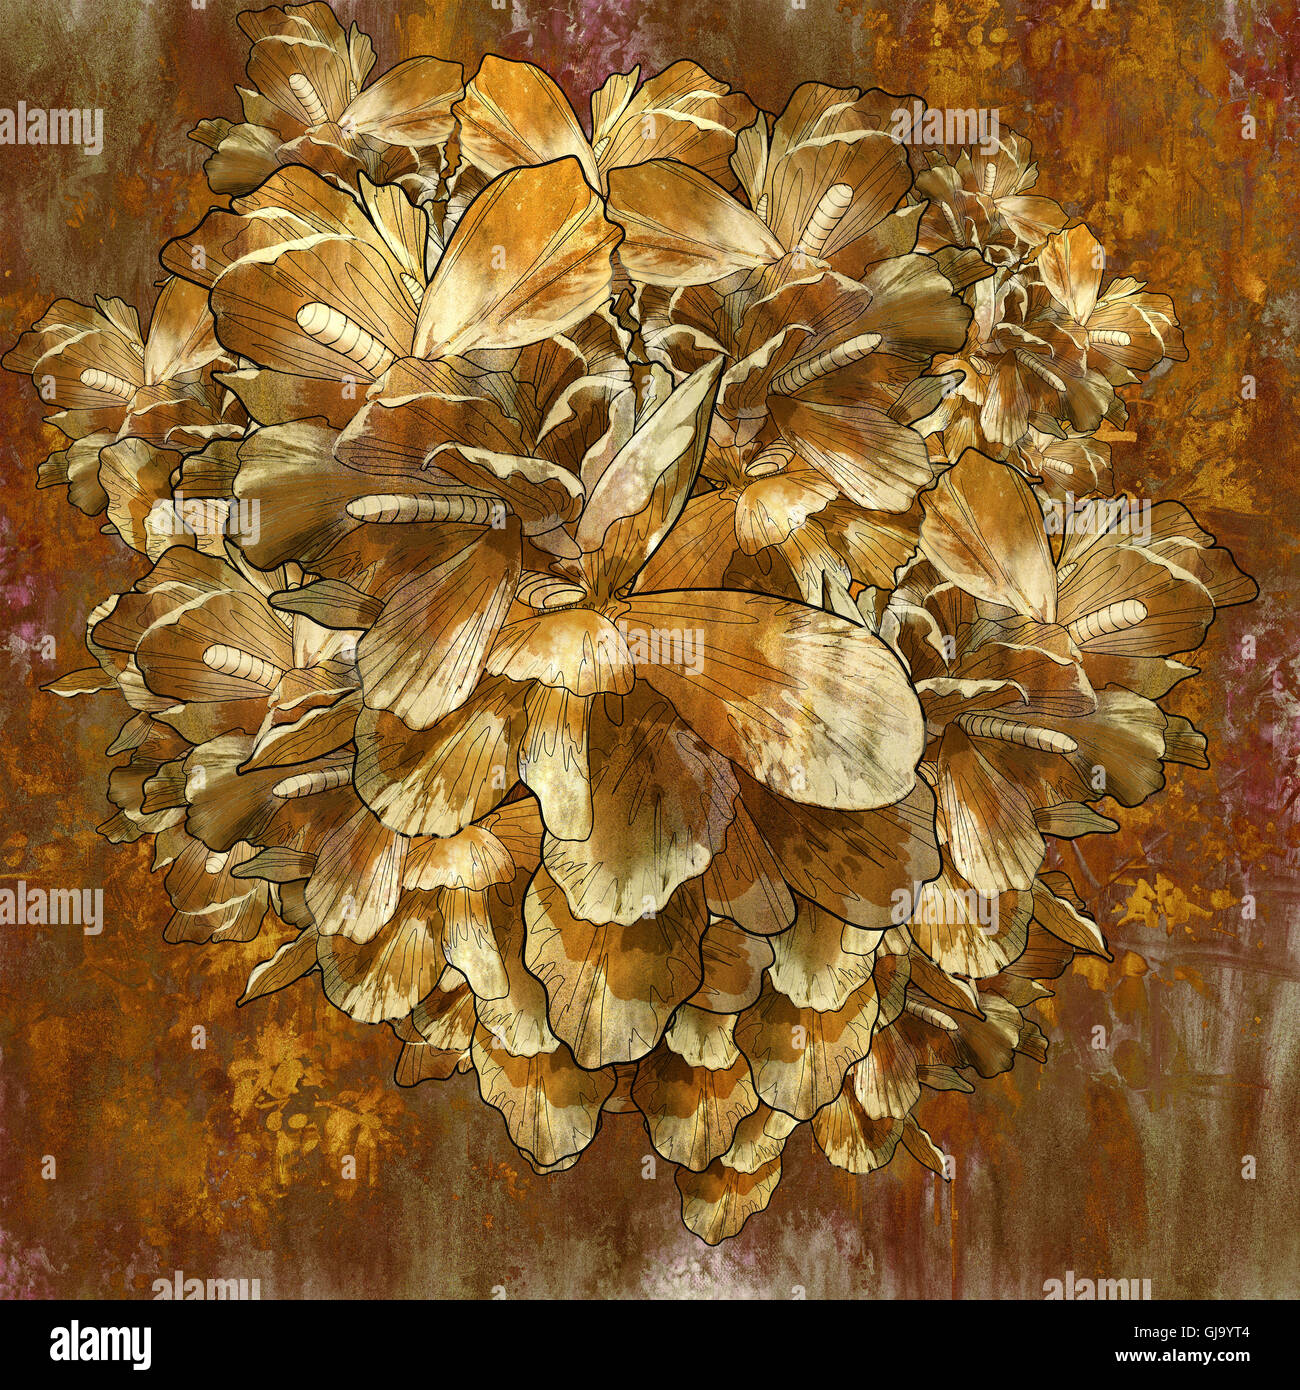 abstract golden flower with grunge texture in oil painting style,illustration Stock Photo